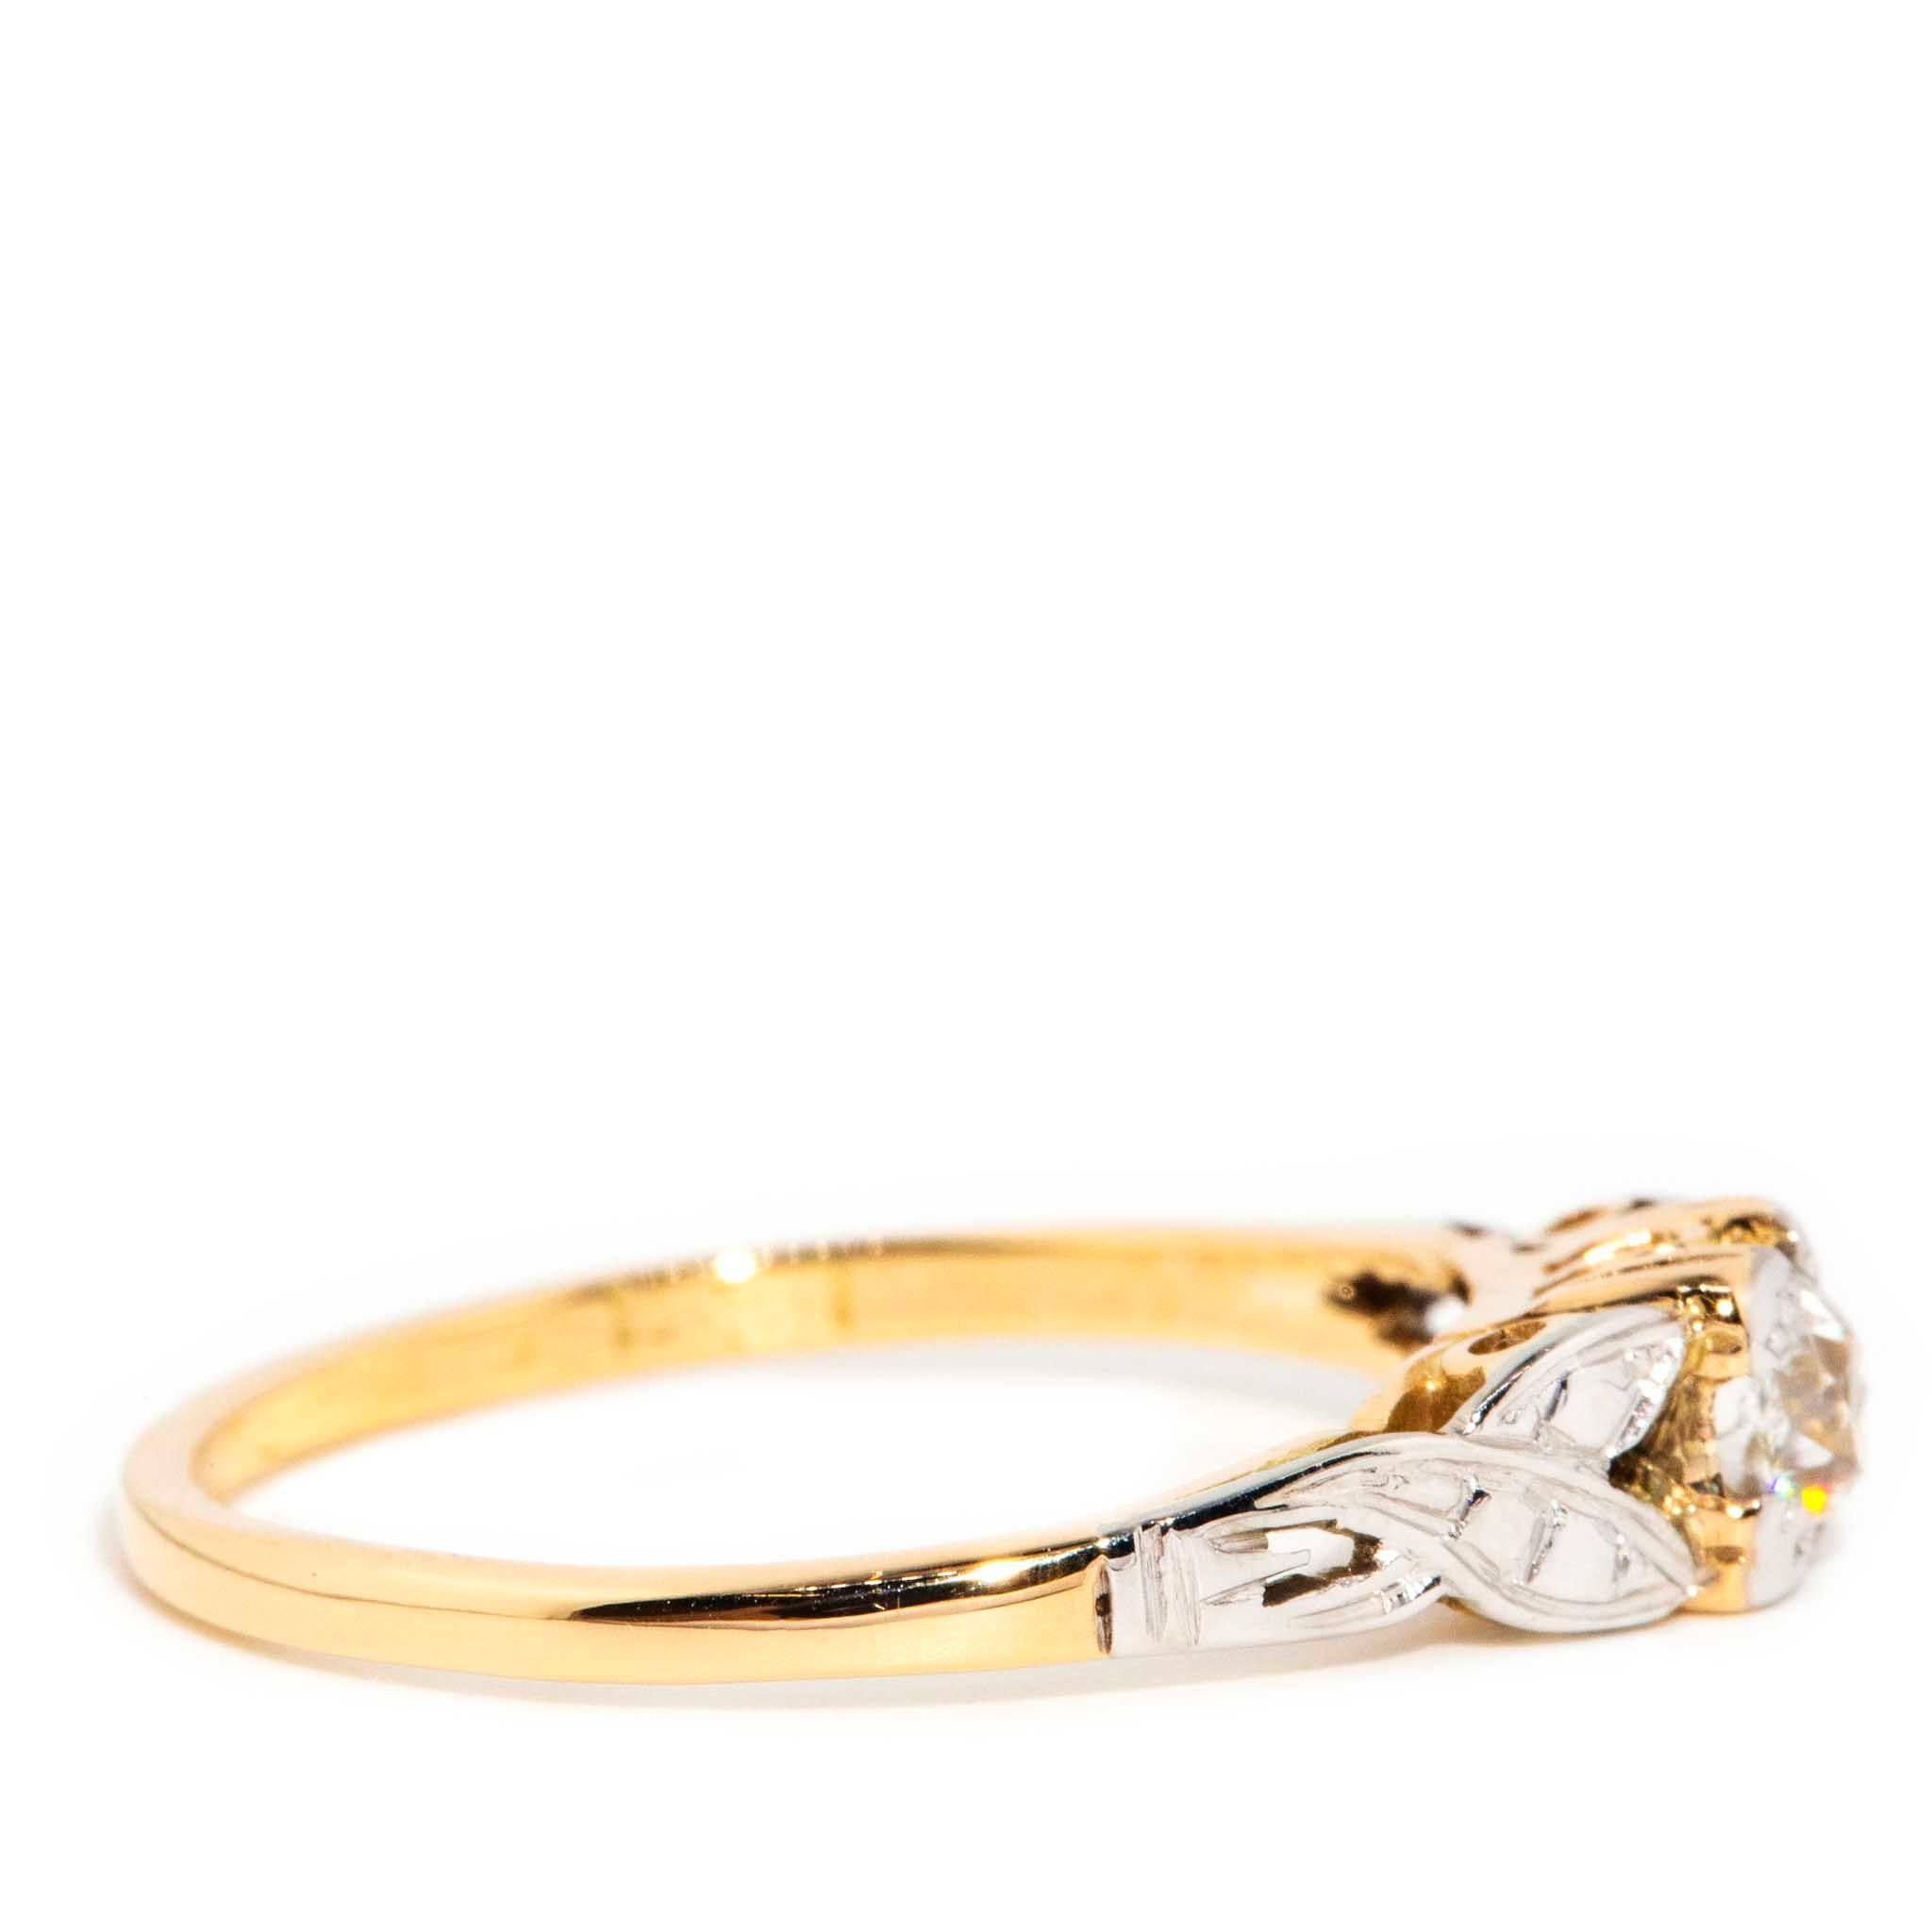 Women's Vintage Circa 1930s Old Cut Diamond Solitaire Ring 15 Carat Yellow & White Gold For Sale